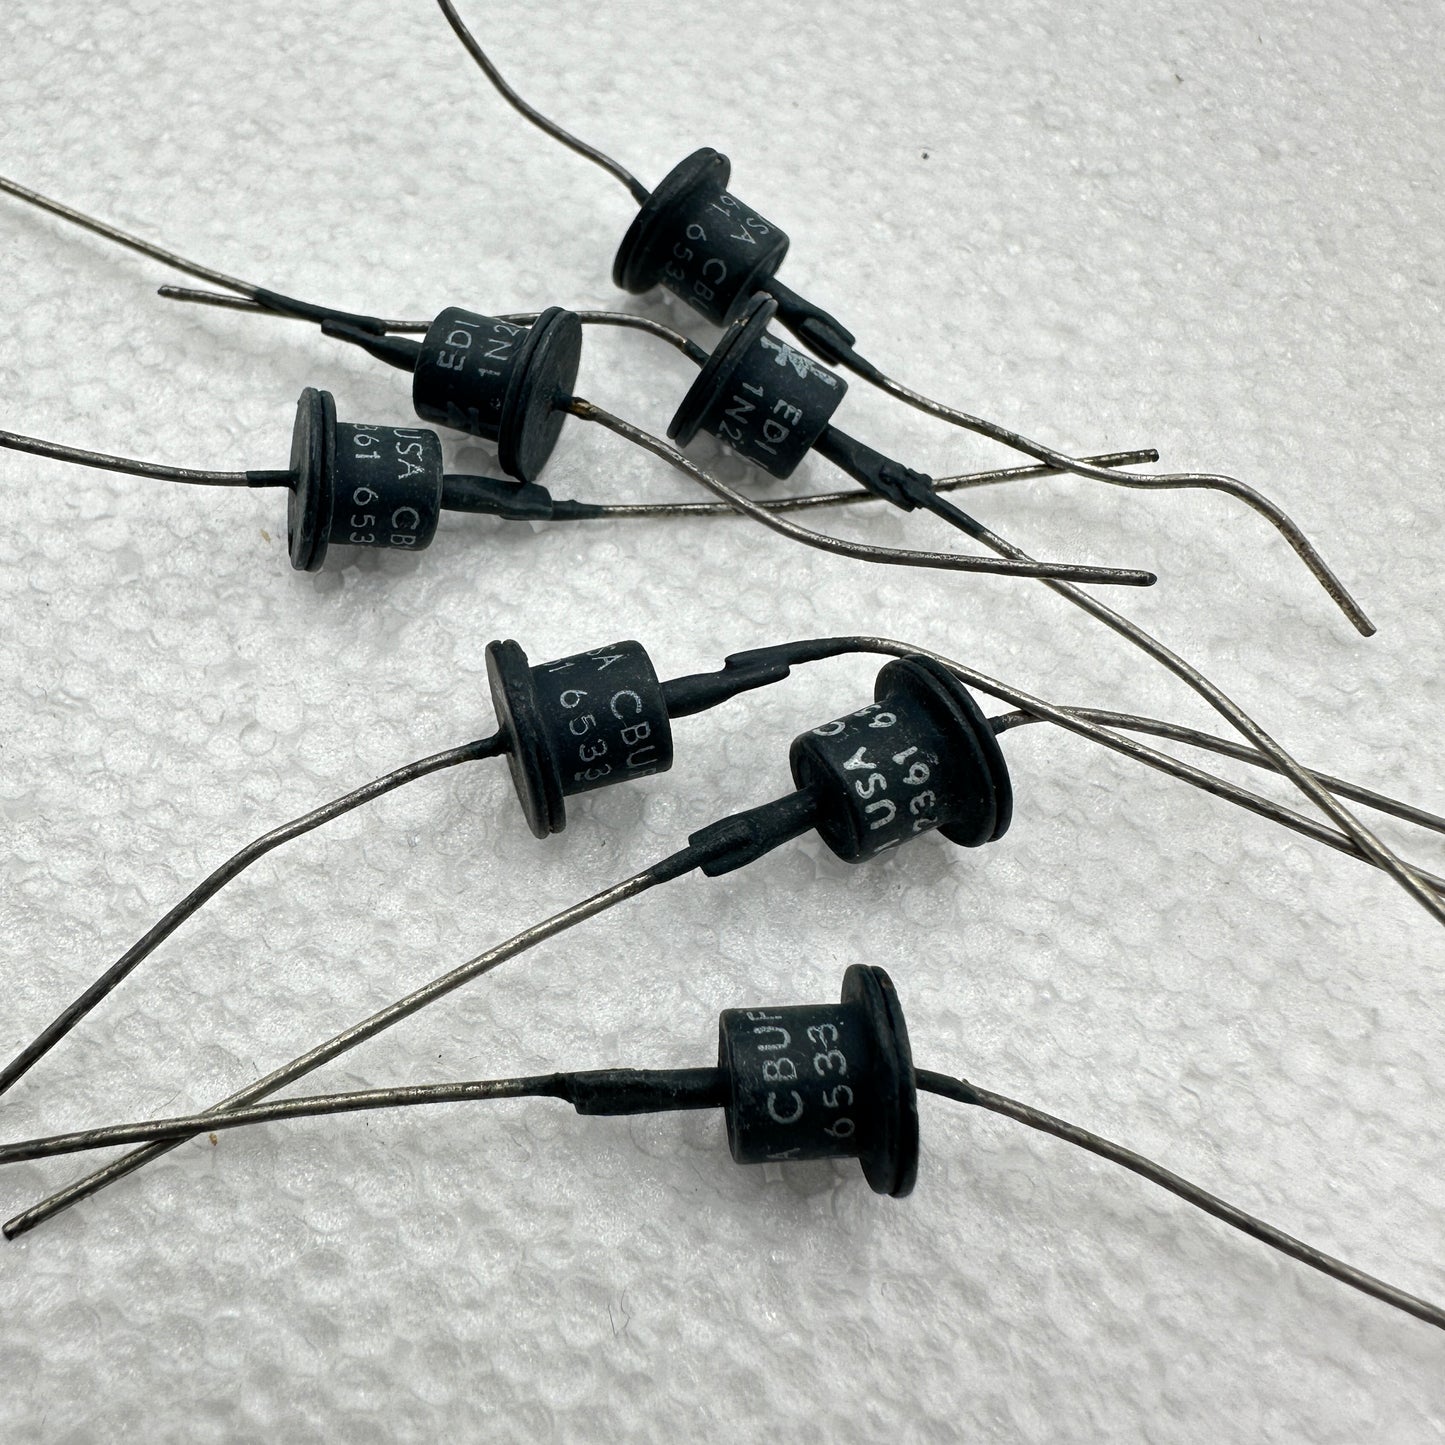 1N2361 Silicon Diode - Rare & Reclaimed